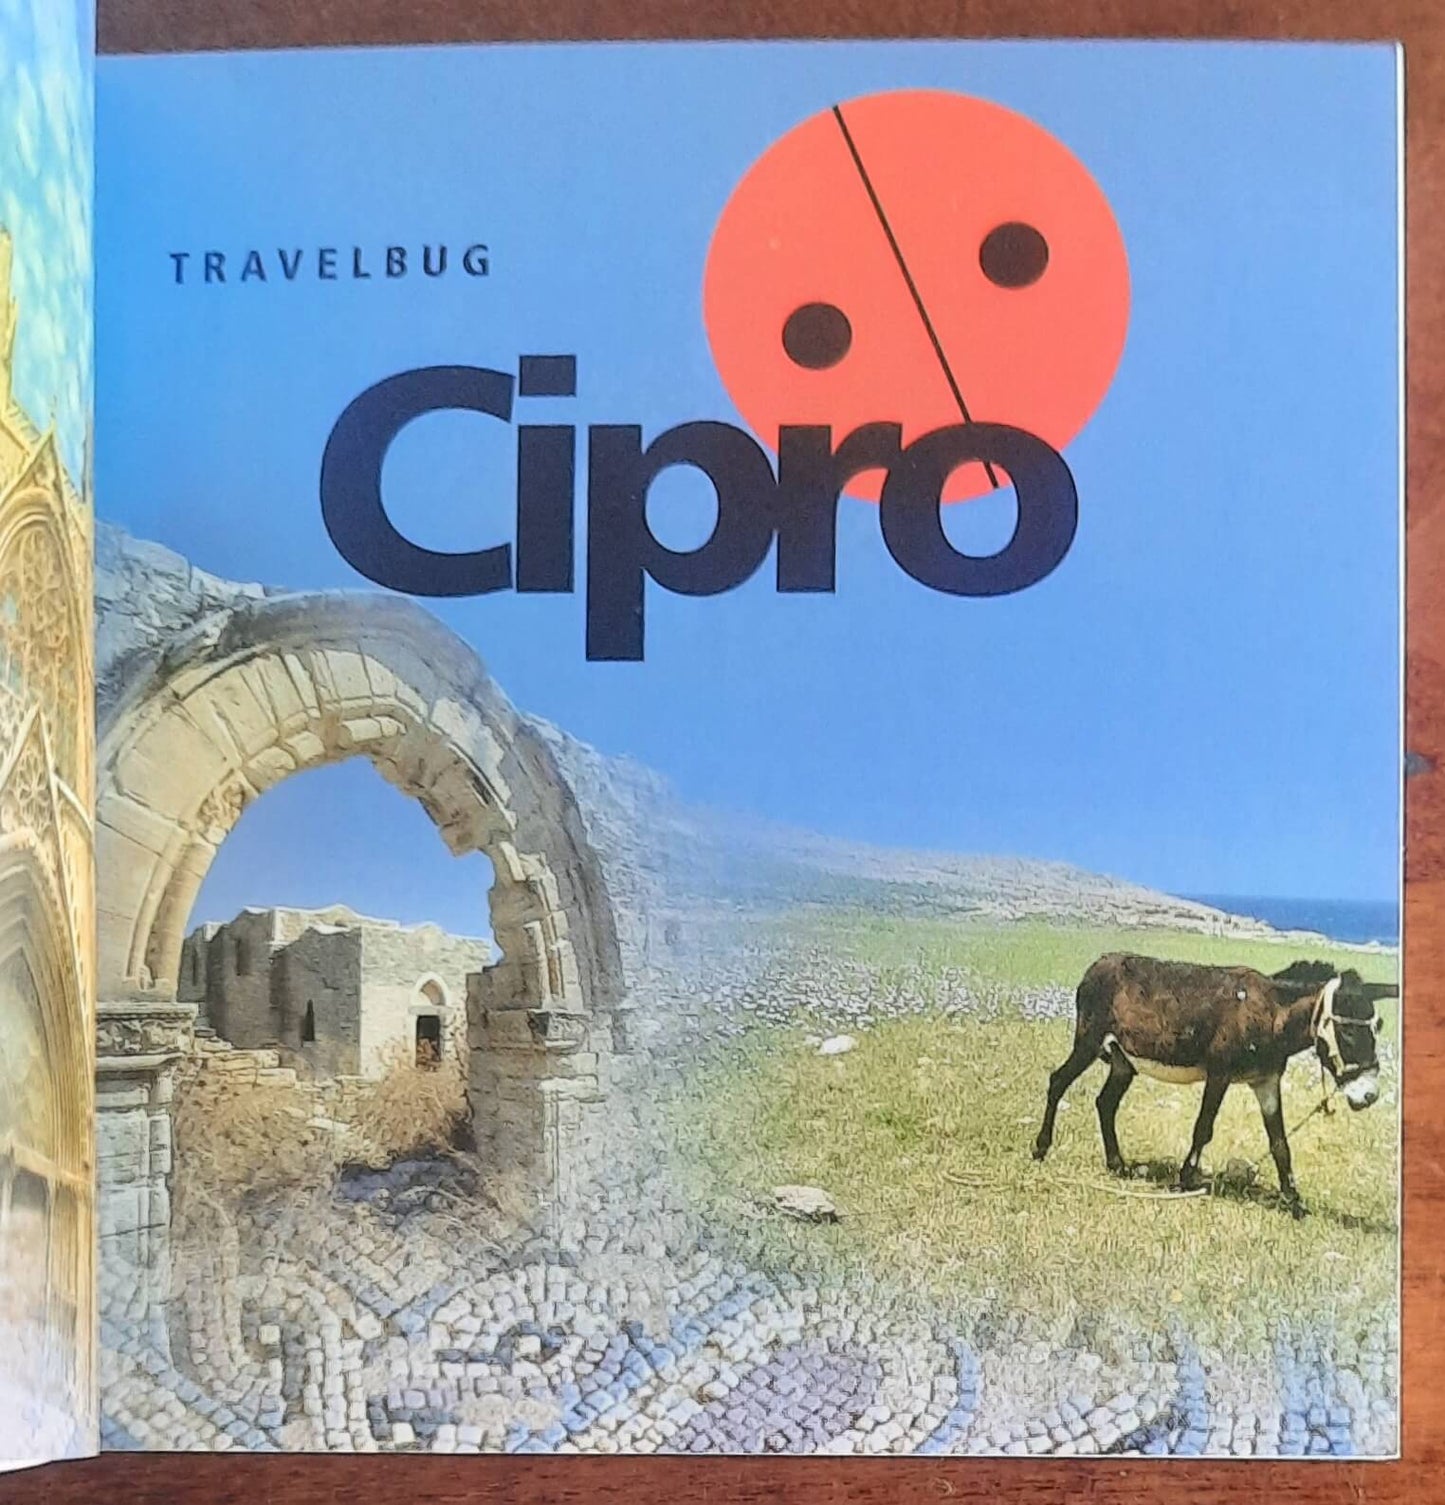 Cipro - Guide Travelbug - Touring Club